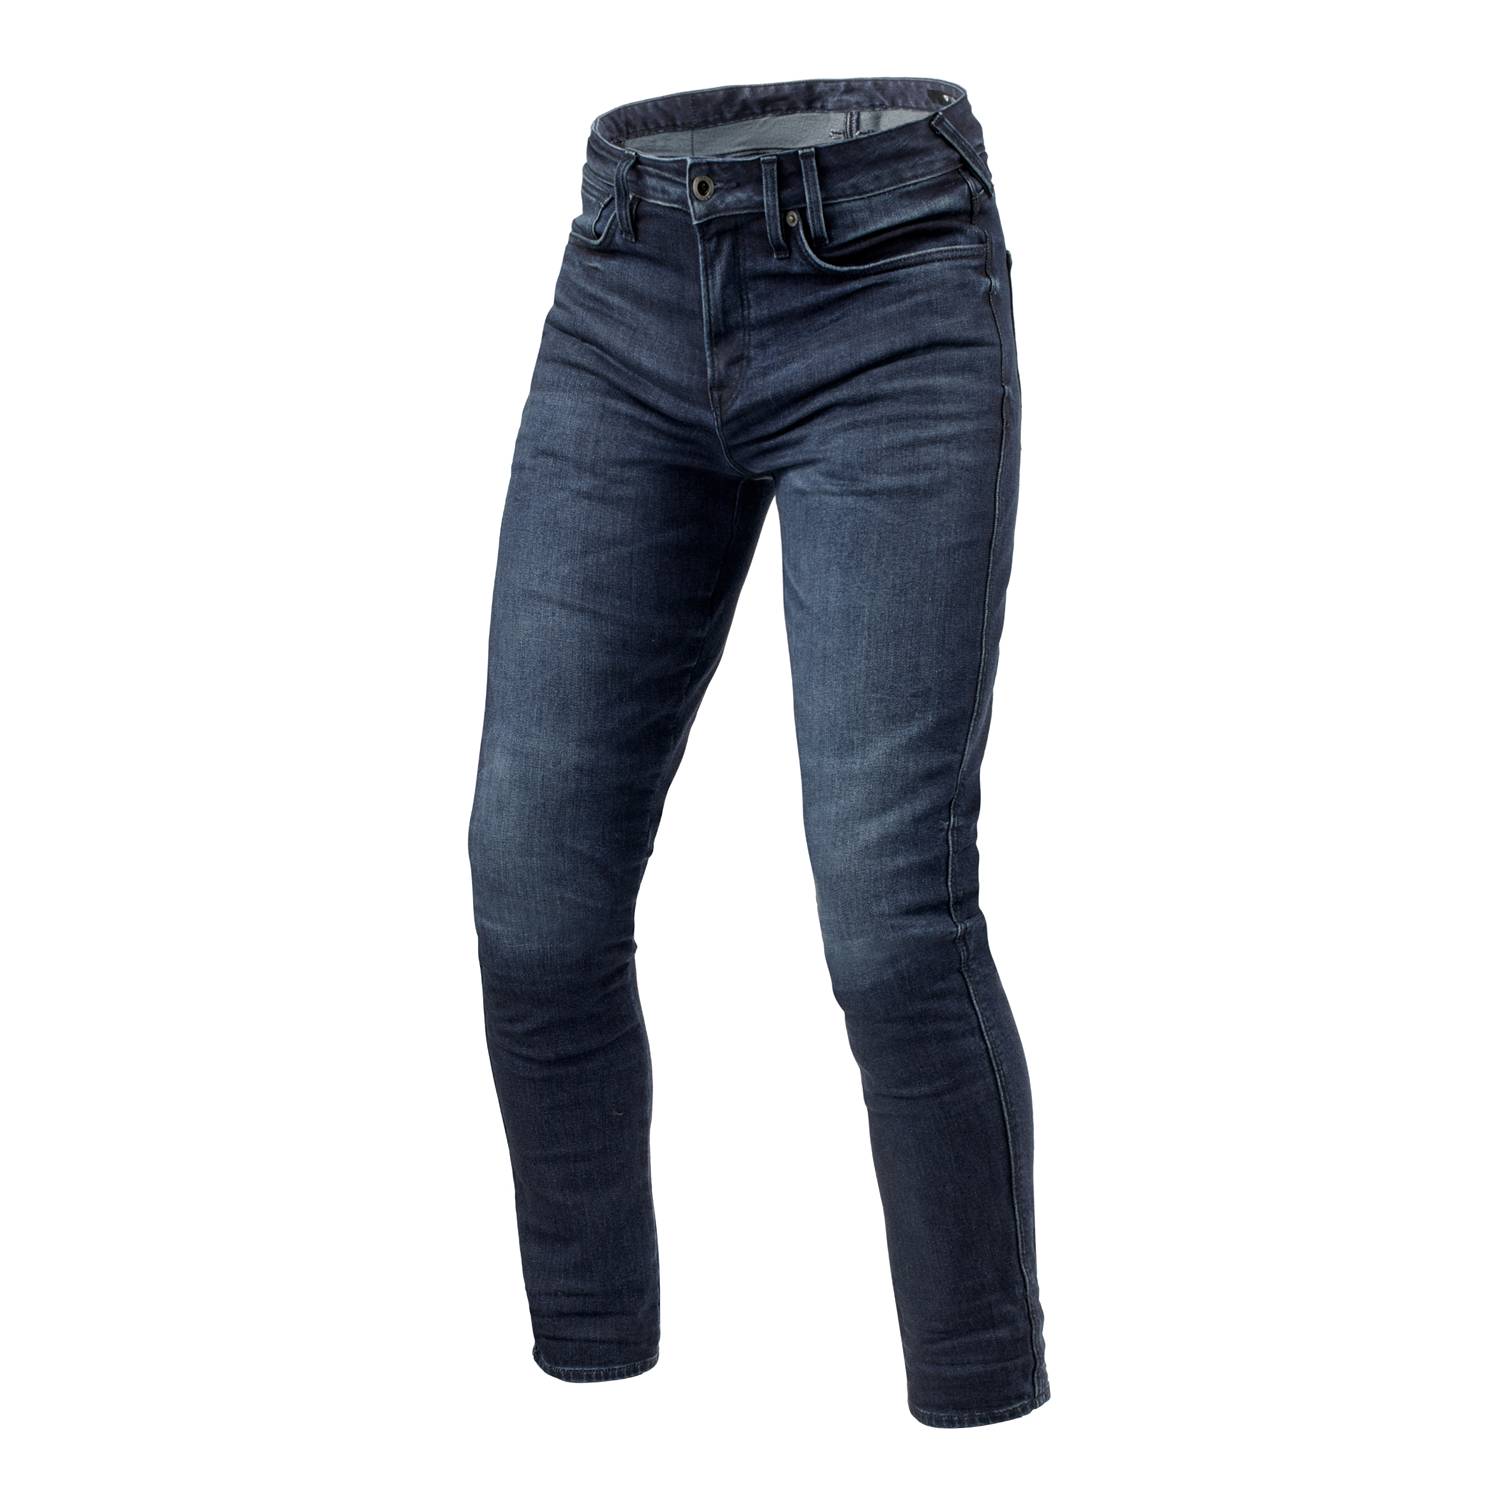 Image of EU REV'IT! Jeans Carlin SK Dark Blue Used L36 Motorcycle Jeans Taille L36/W33